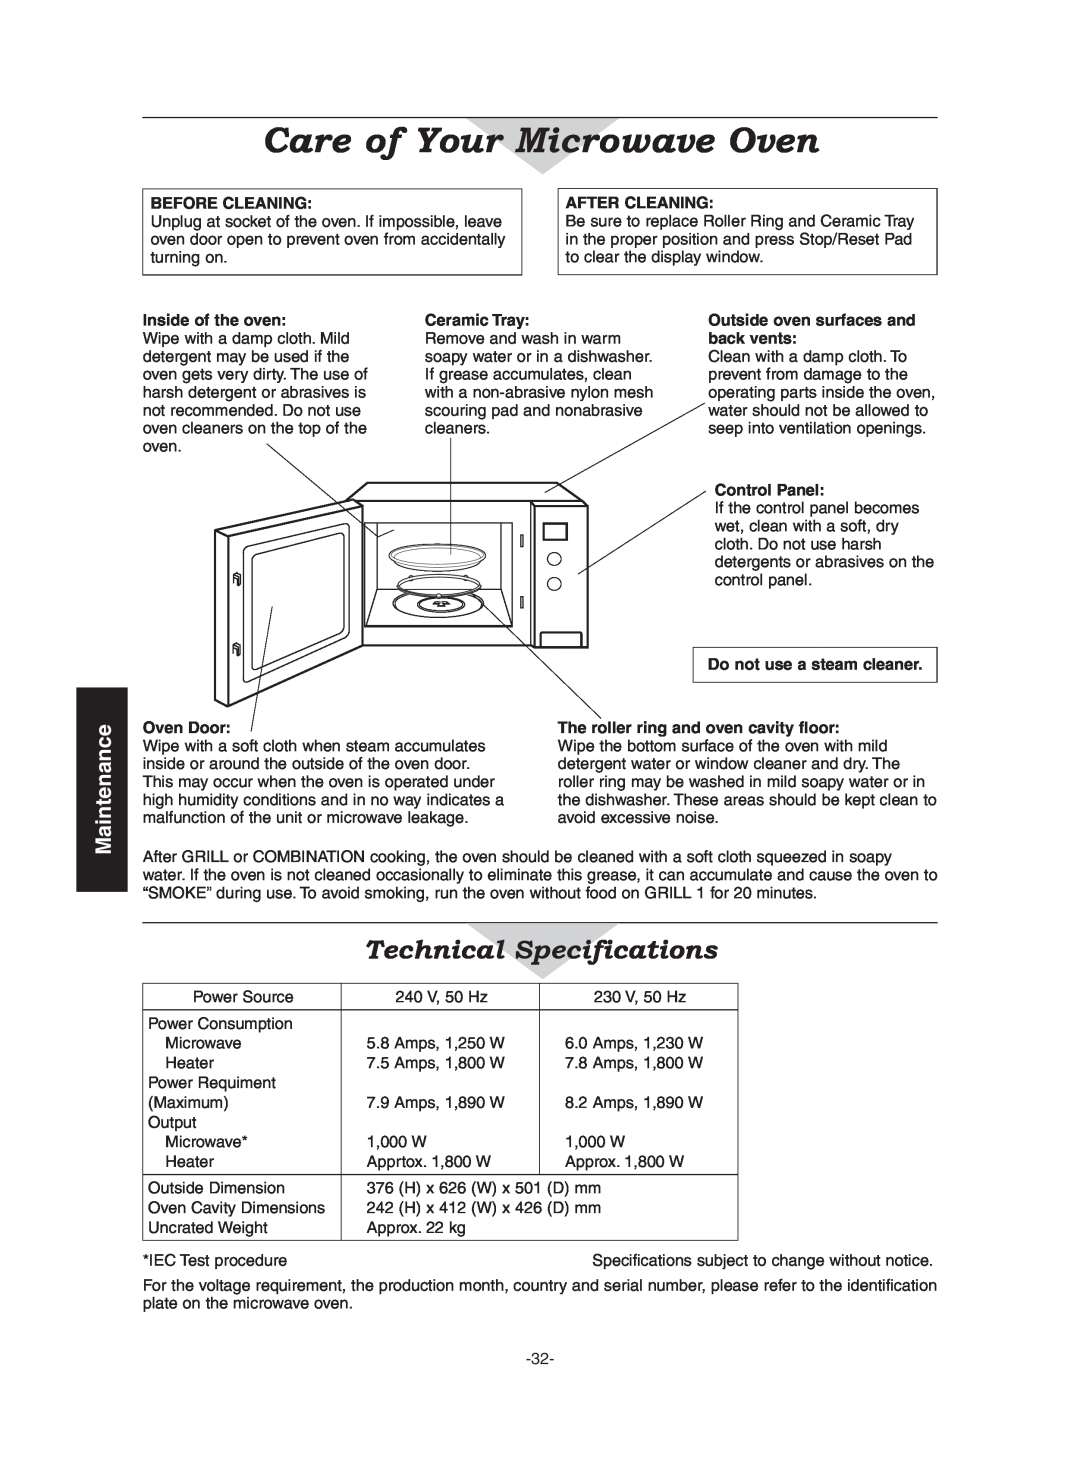 Panasonic NN-CD987W, NN-CD997S operating instructions Care of Your Microwave Oven, Technical Specifications, Maintenance 